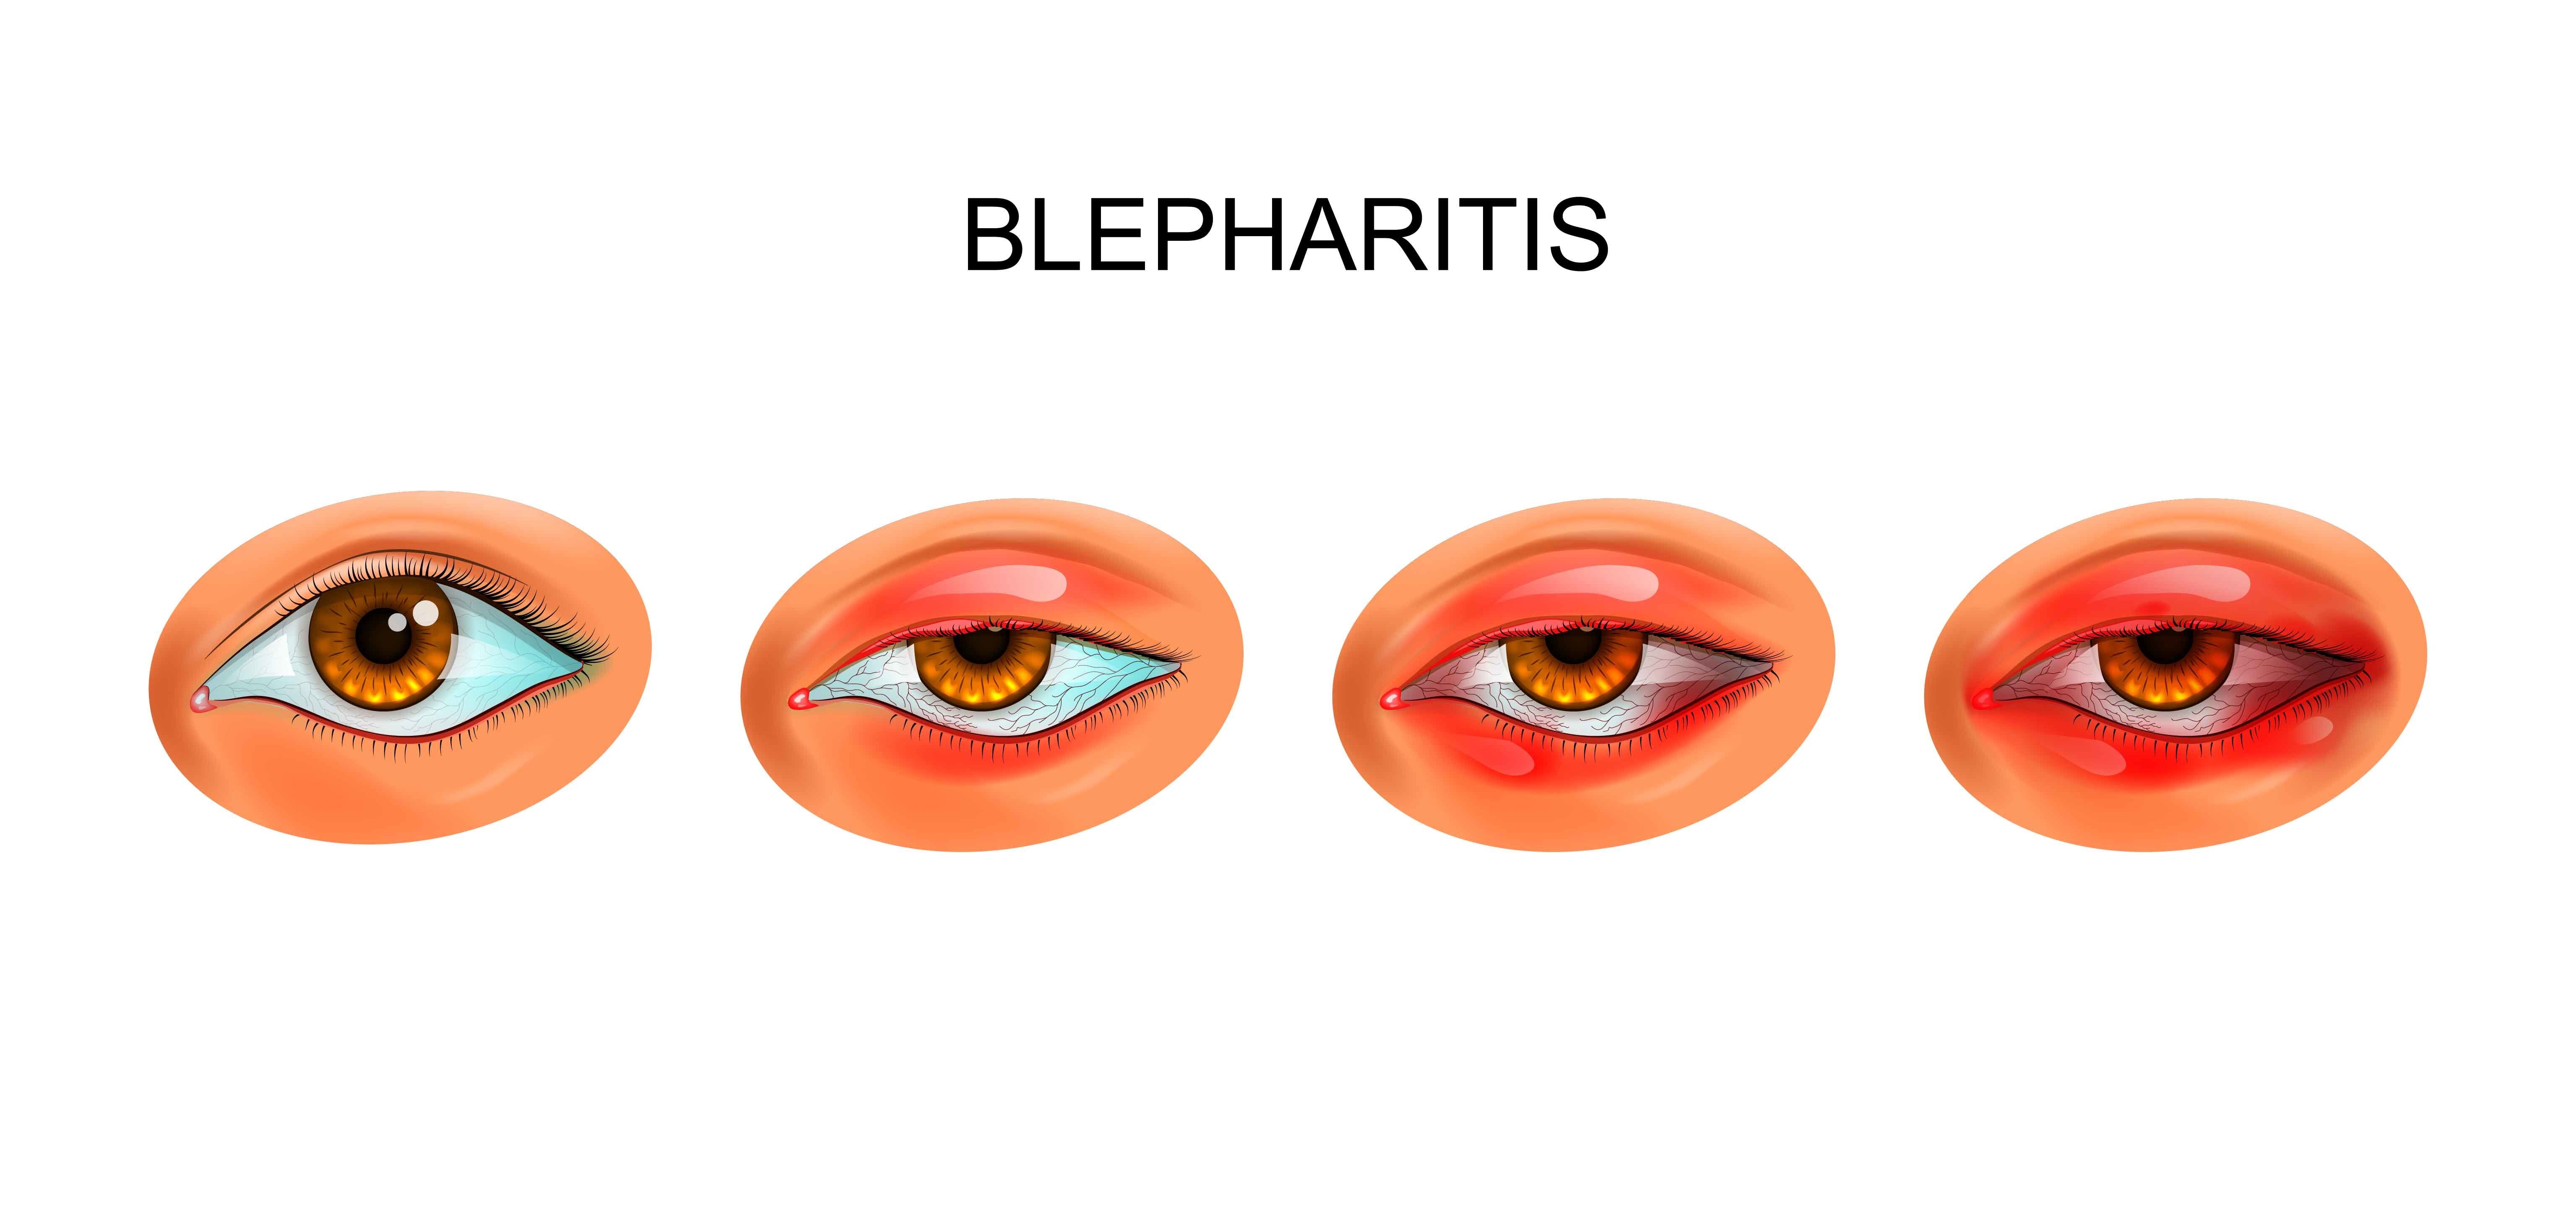 A condition such as blepharitis